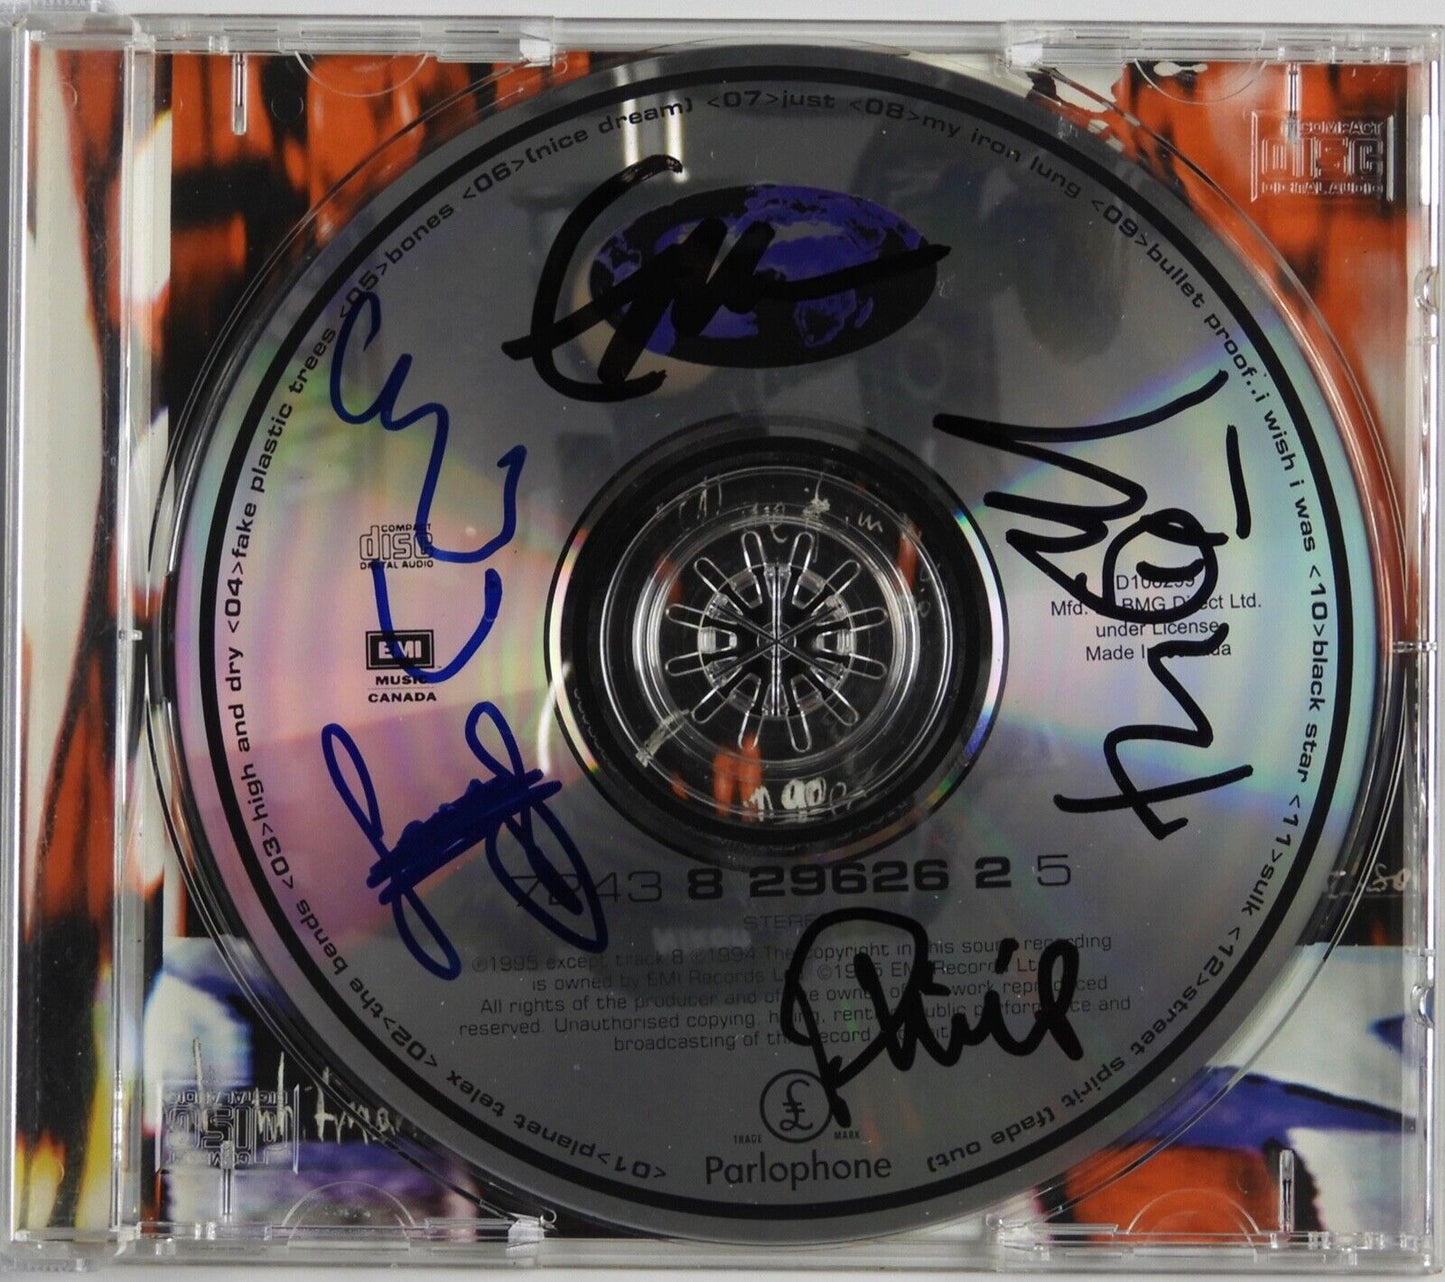 Radiohead Fully Signed Autograph JSA The Bends CD Epperson REAL COA Thom Yorke